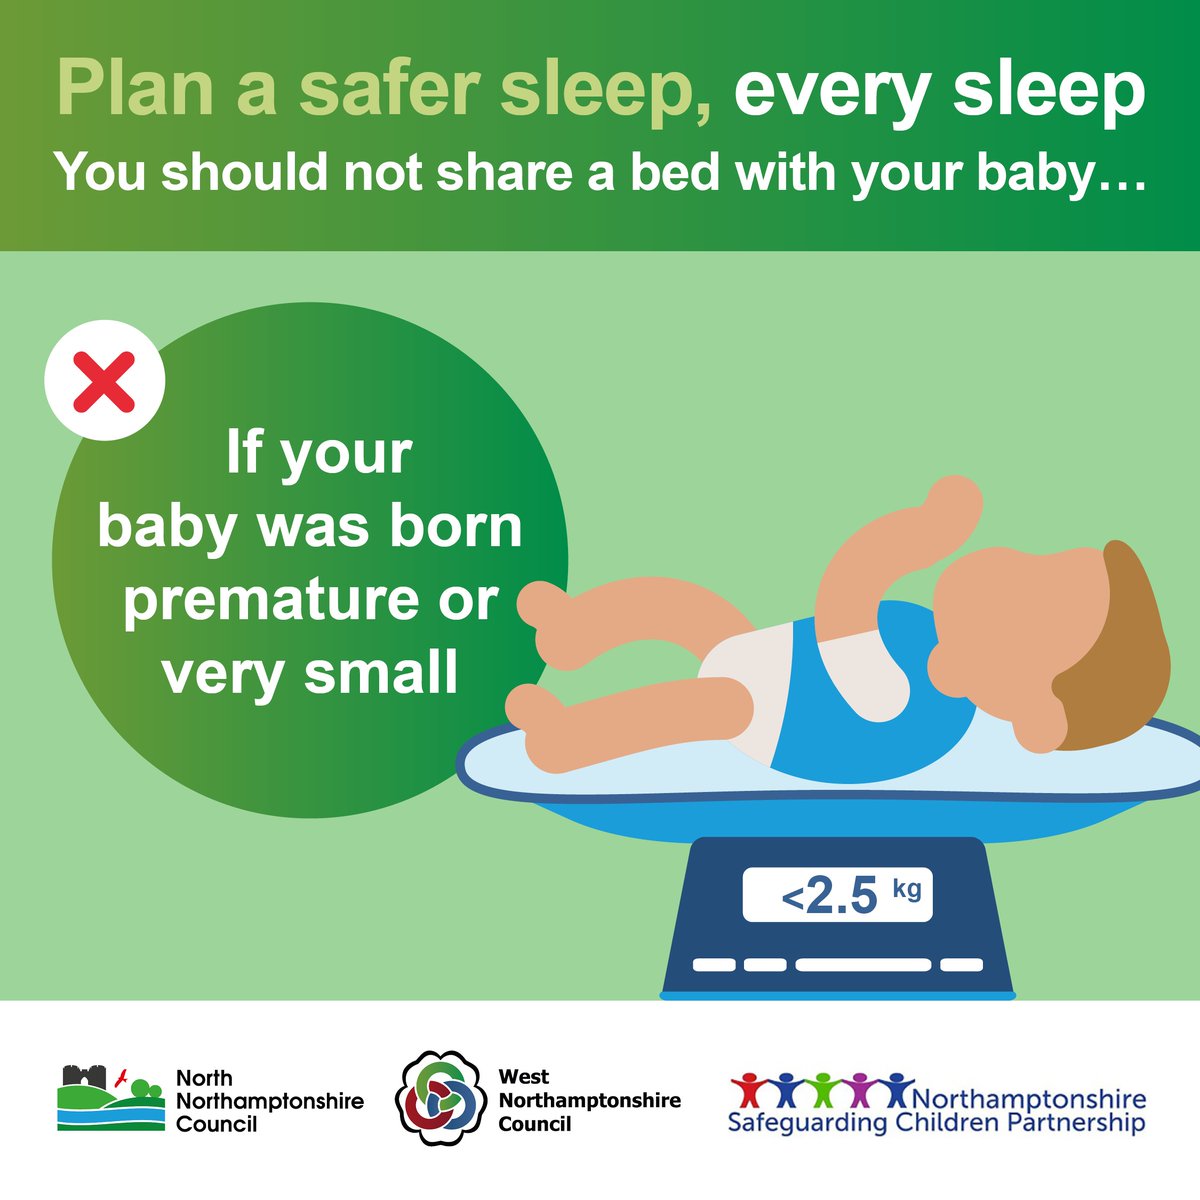 Babies born prematurely (before 37 weeks) or those under 2.5kgs at birth are particularly vulnerable to sudden infant death (SID). It's important that safe sleep advice is followed. The Lullaby Trust provides advice for parents/carers at bit.ly/3VSGVjX